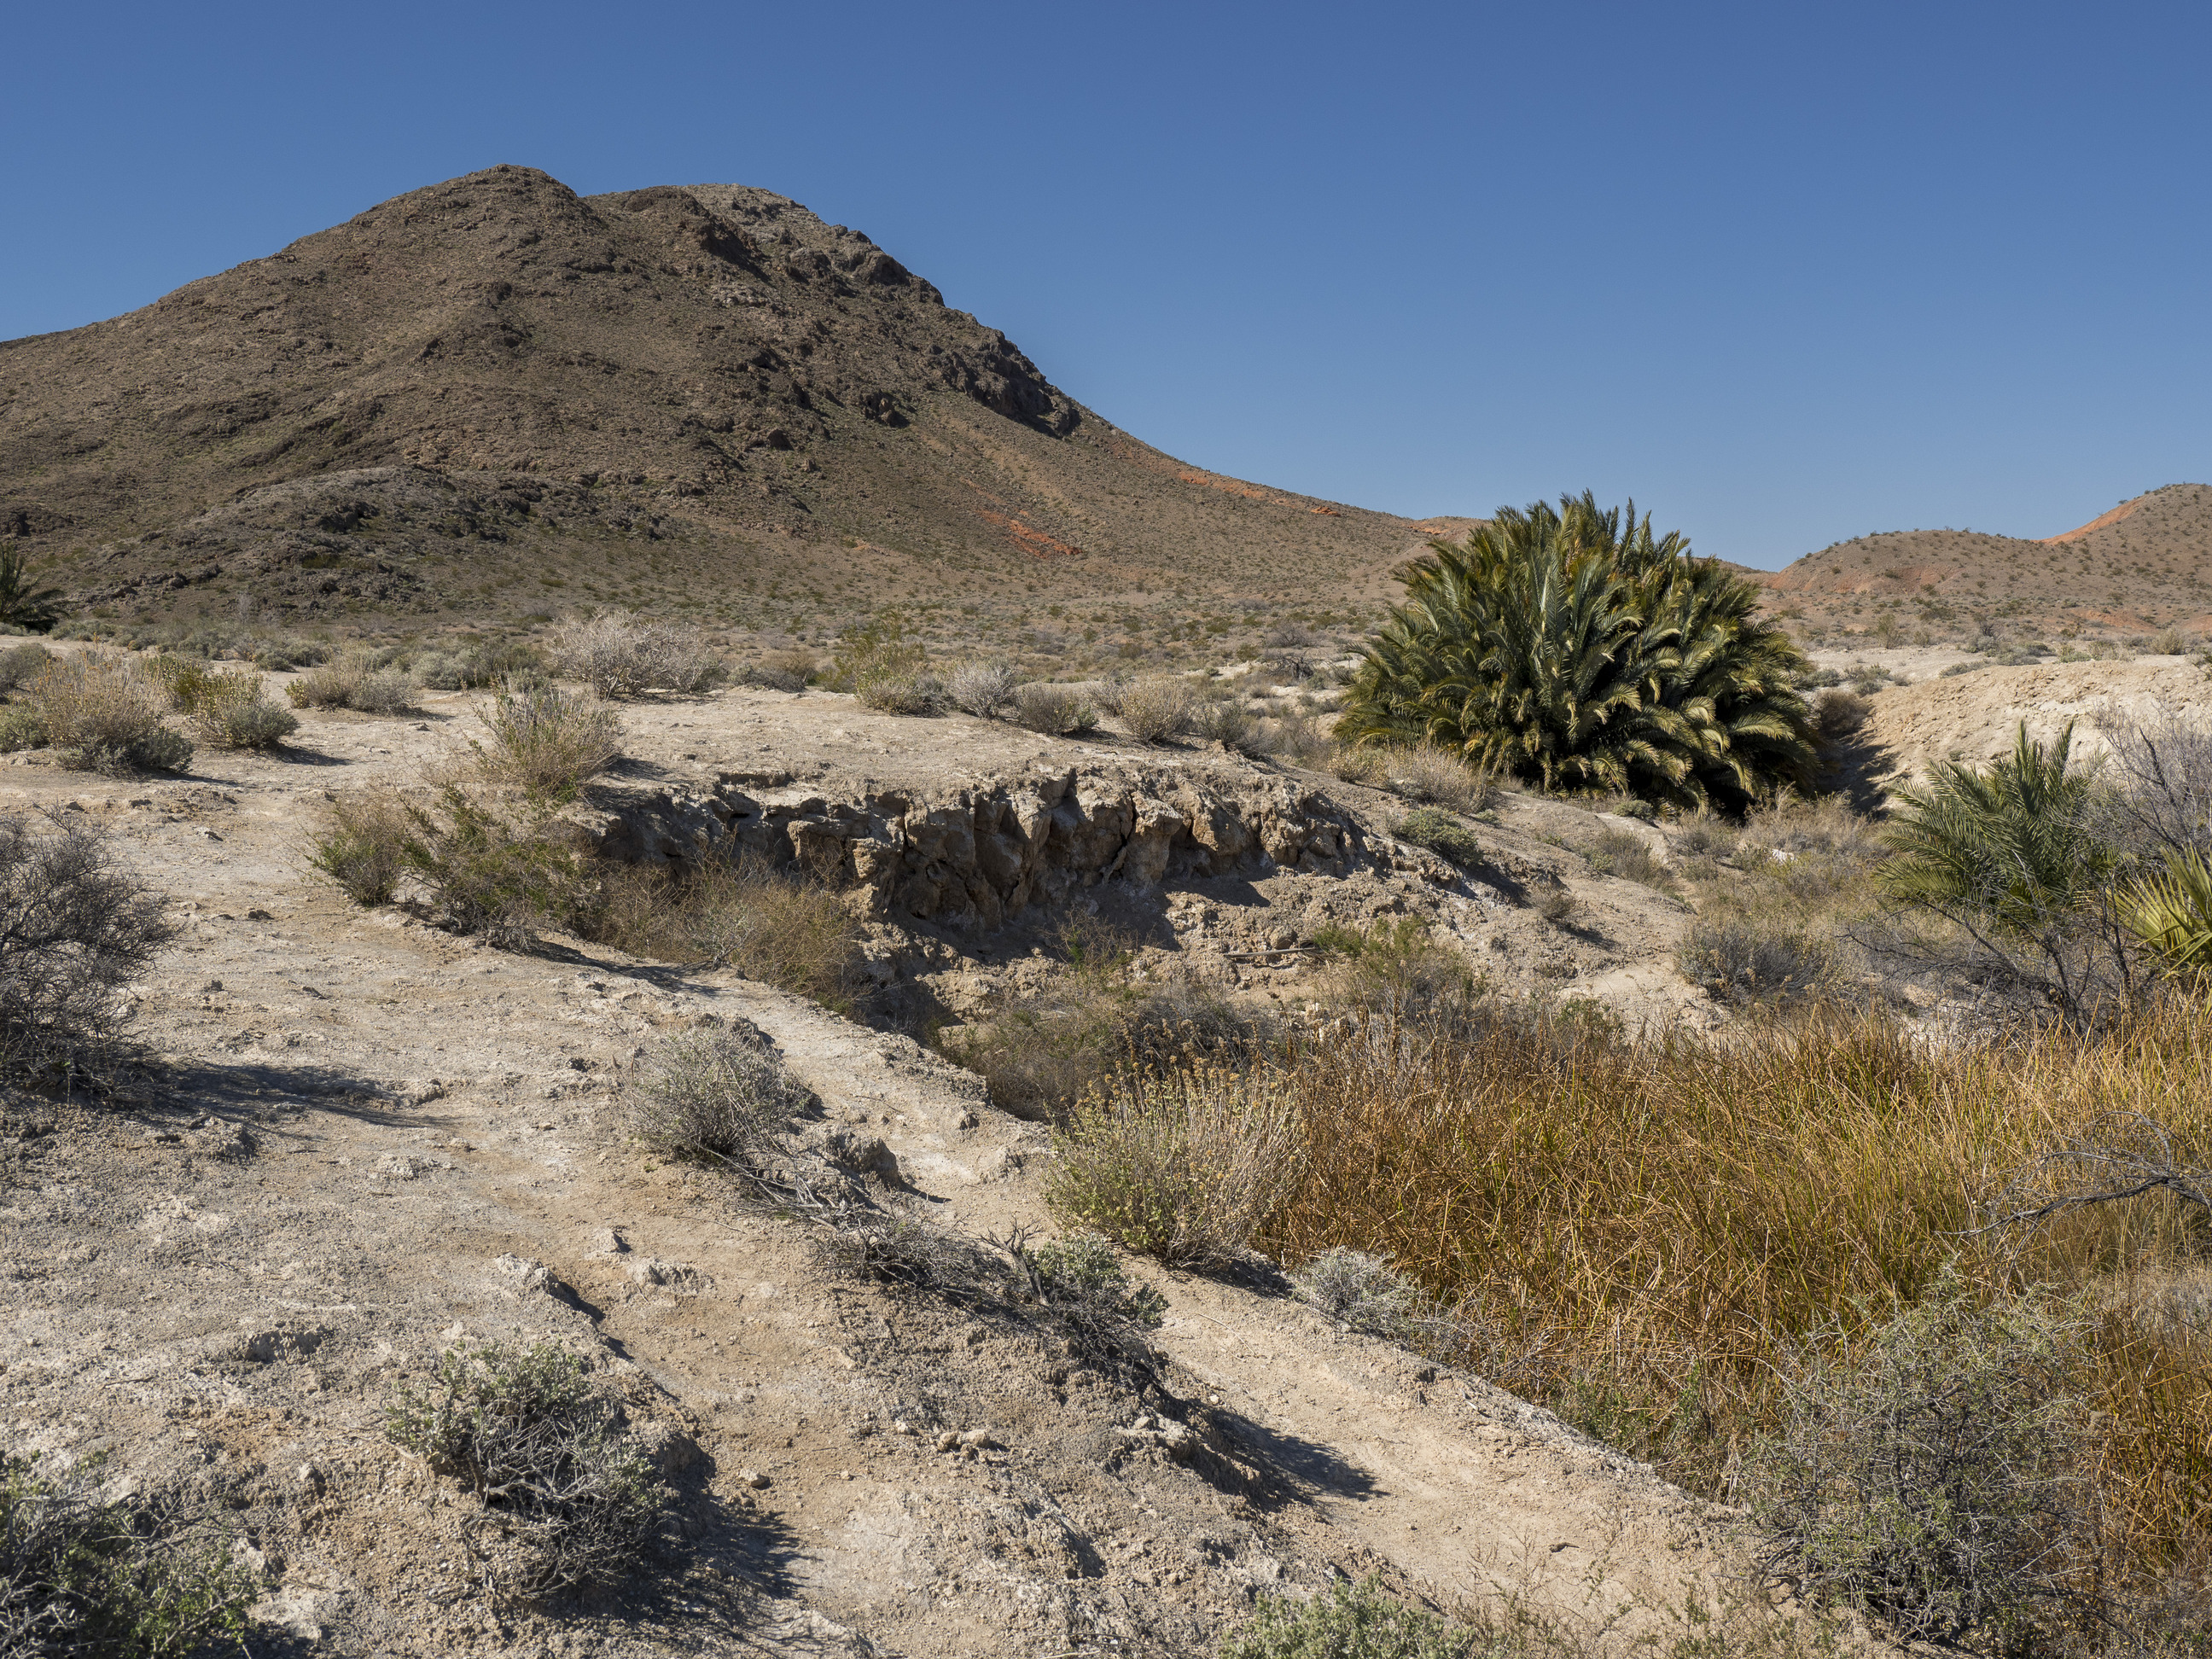 narrow footpath at left, wash with plants at right, desert hill upper left